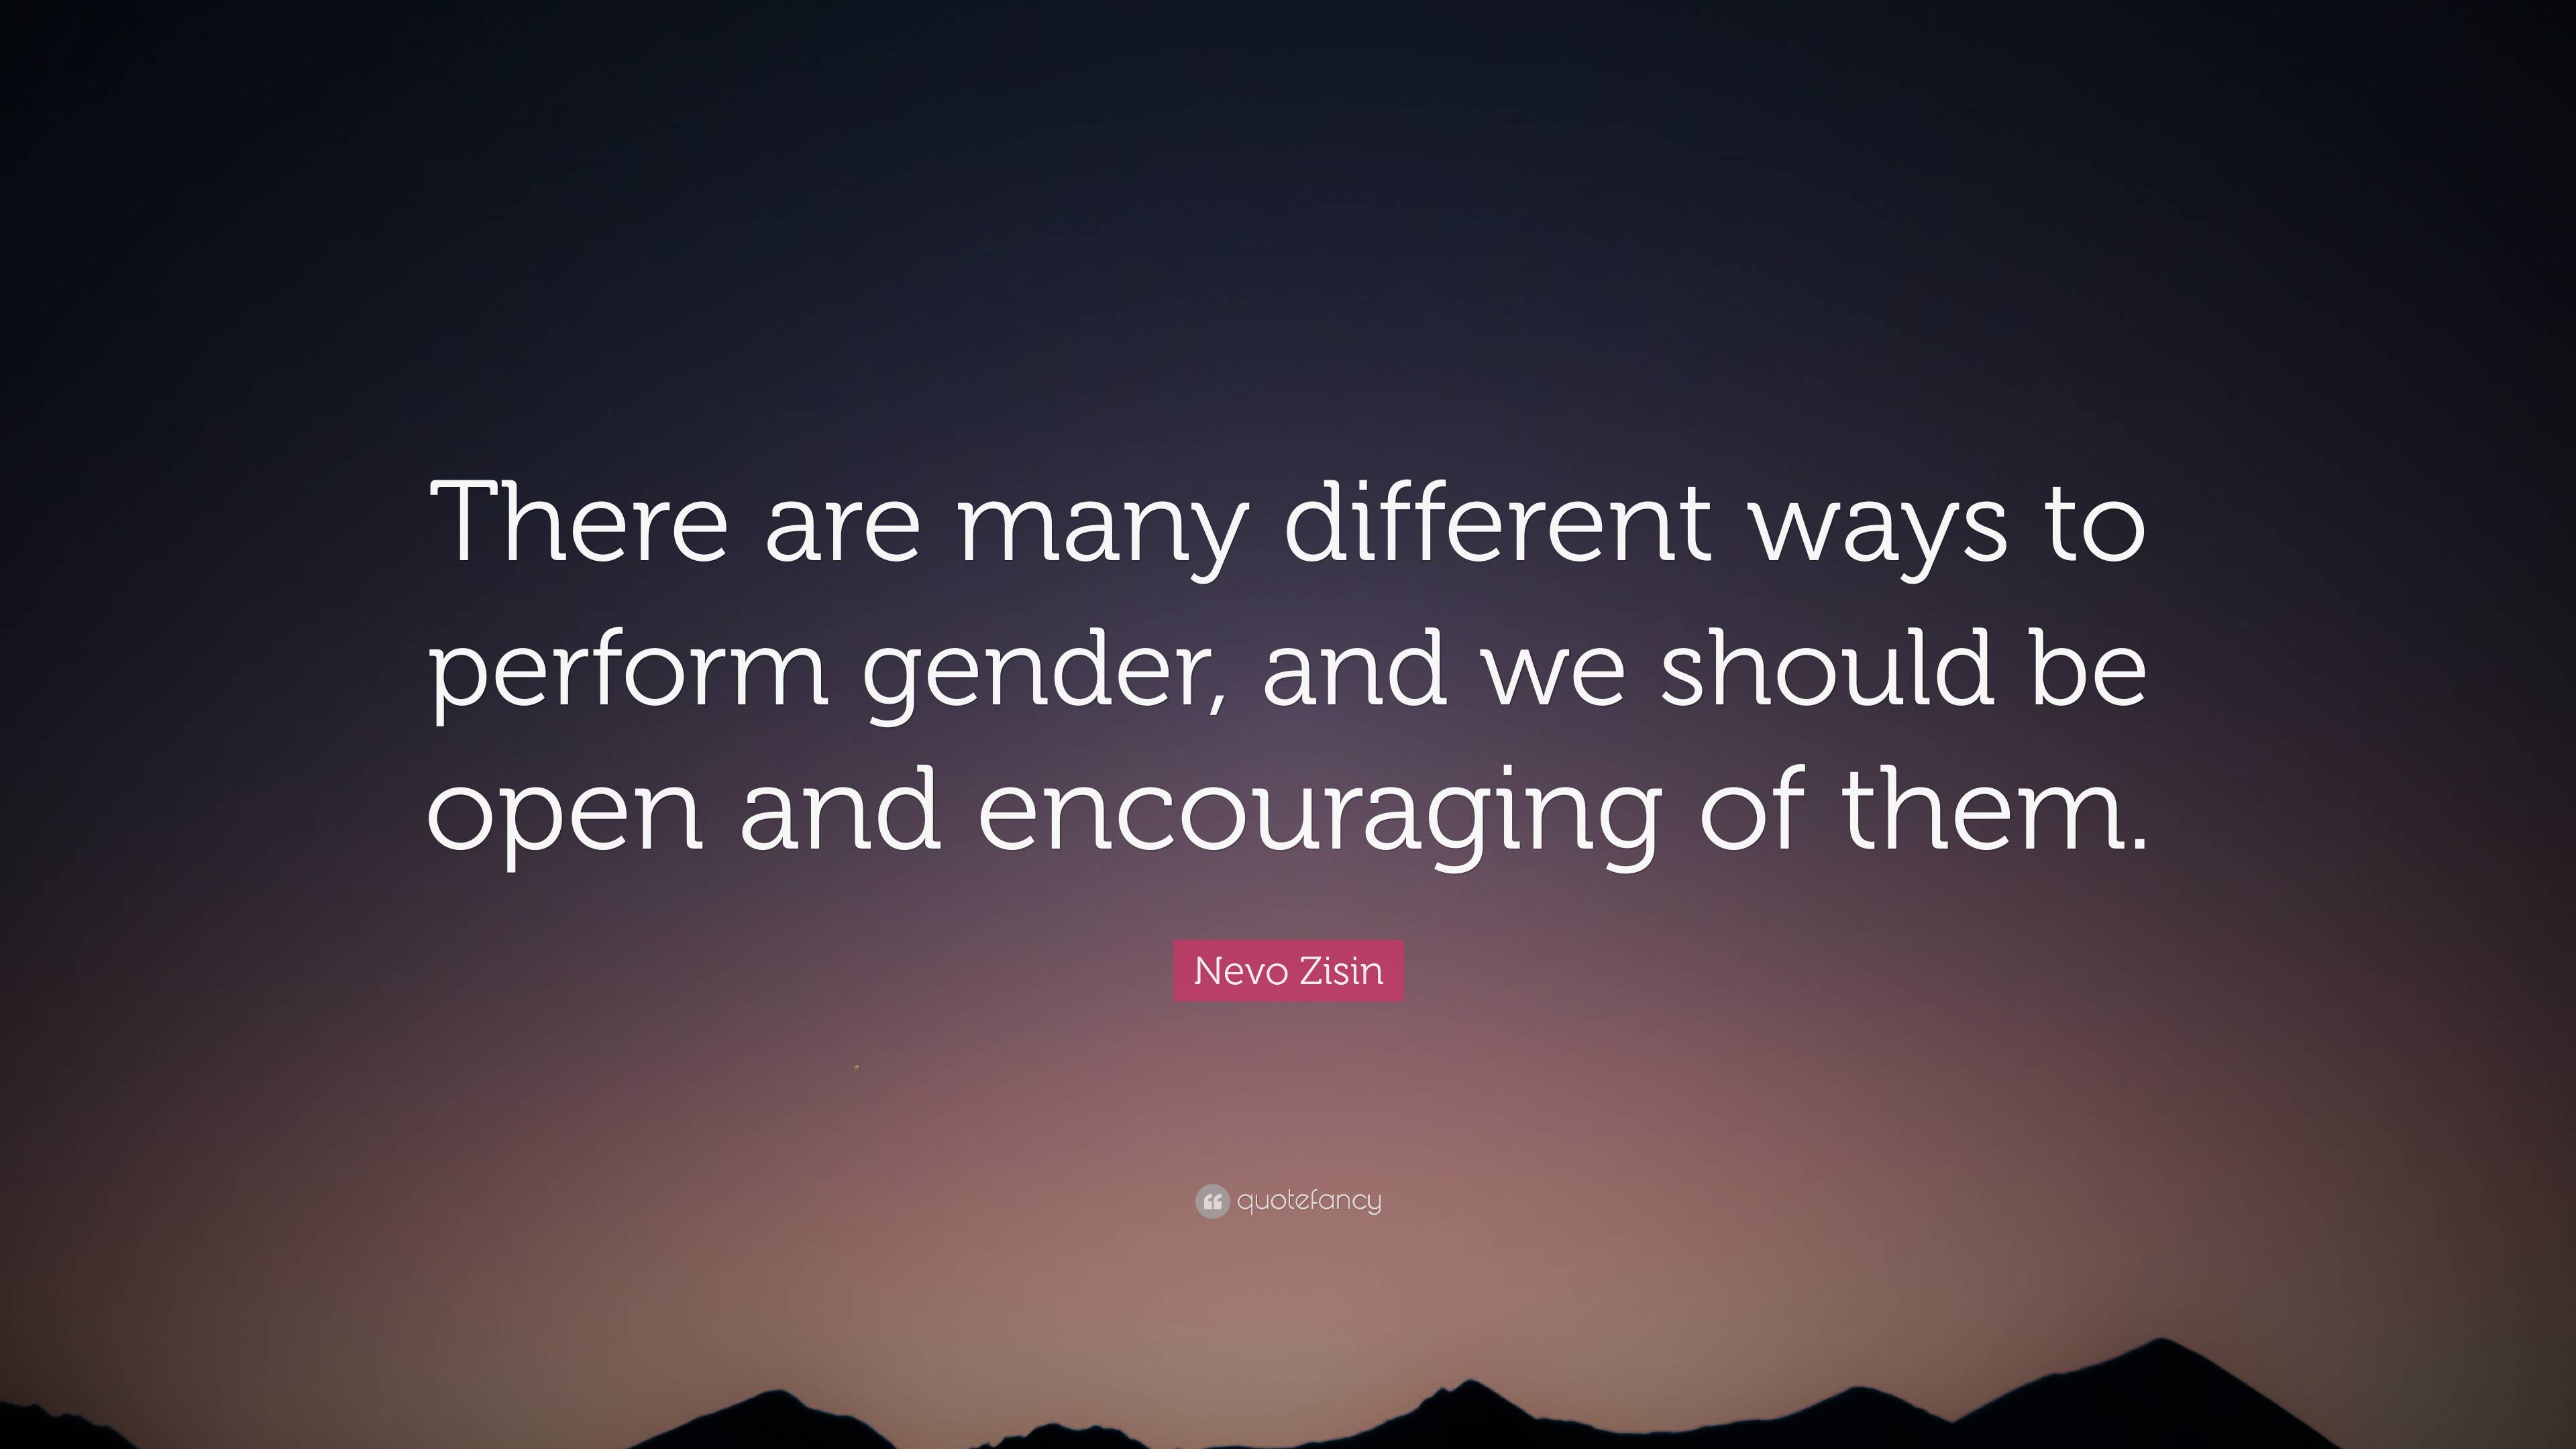 Nevo Zisin Quote “there Are Many Different Ways To Perform Gender And We Should Be Open And